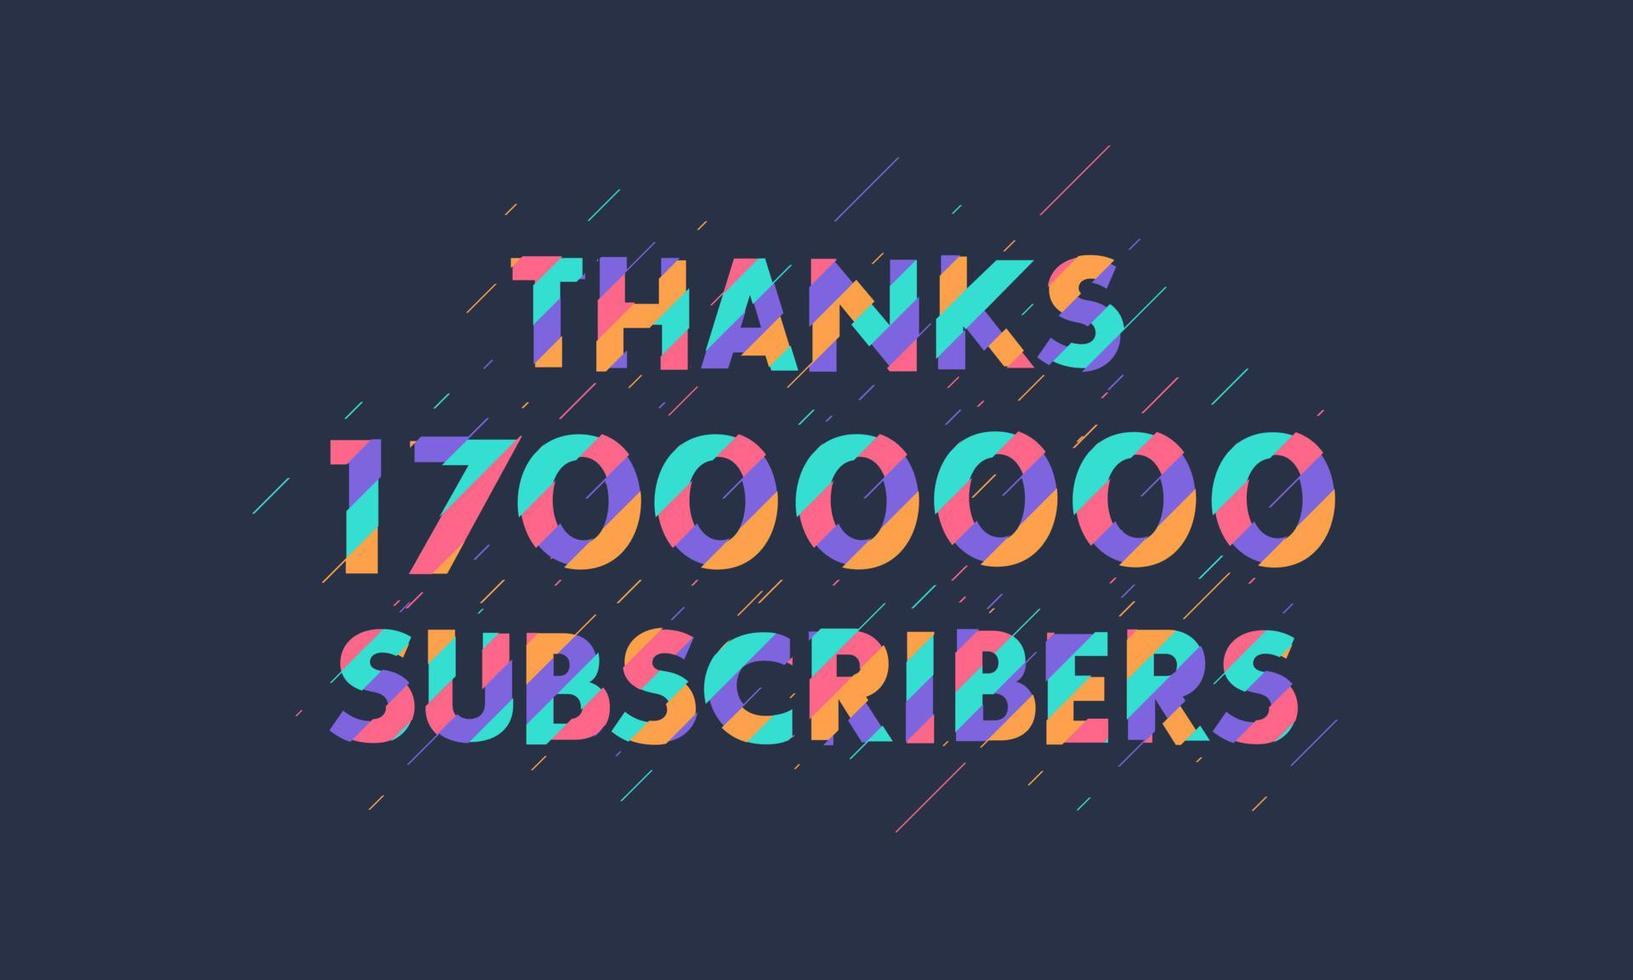 Thanks 17000000 subscribers, 17M subscribers celebration modern colorful design. vector